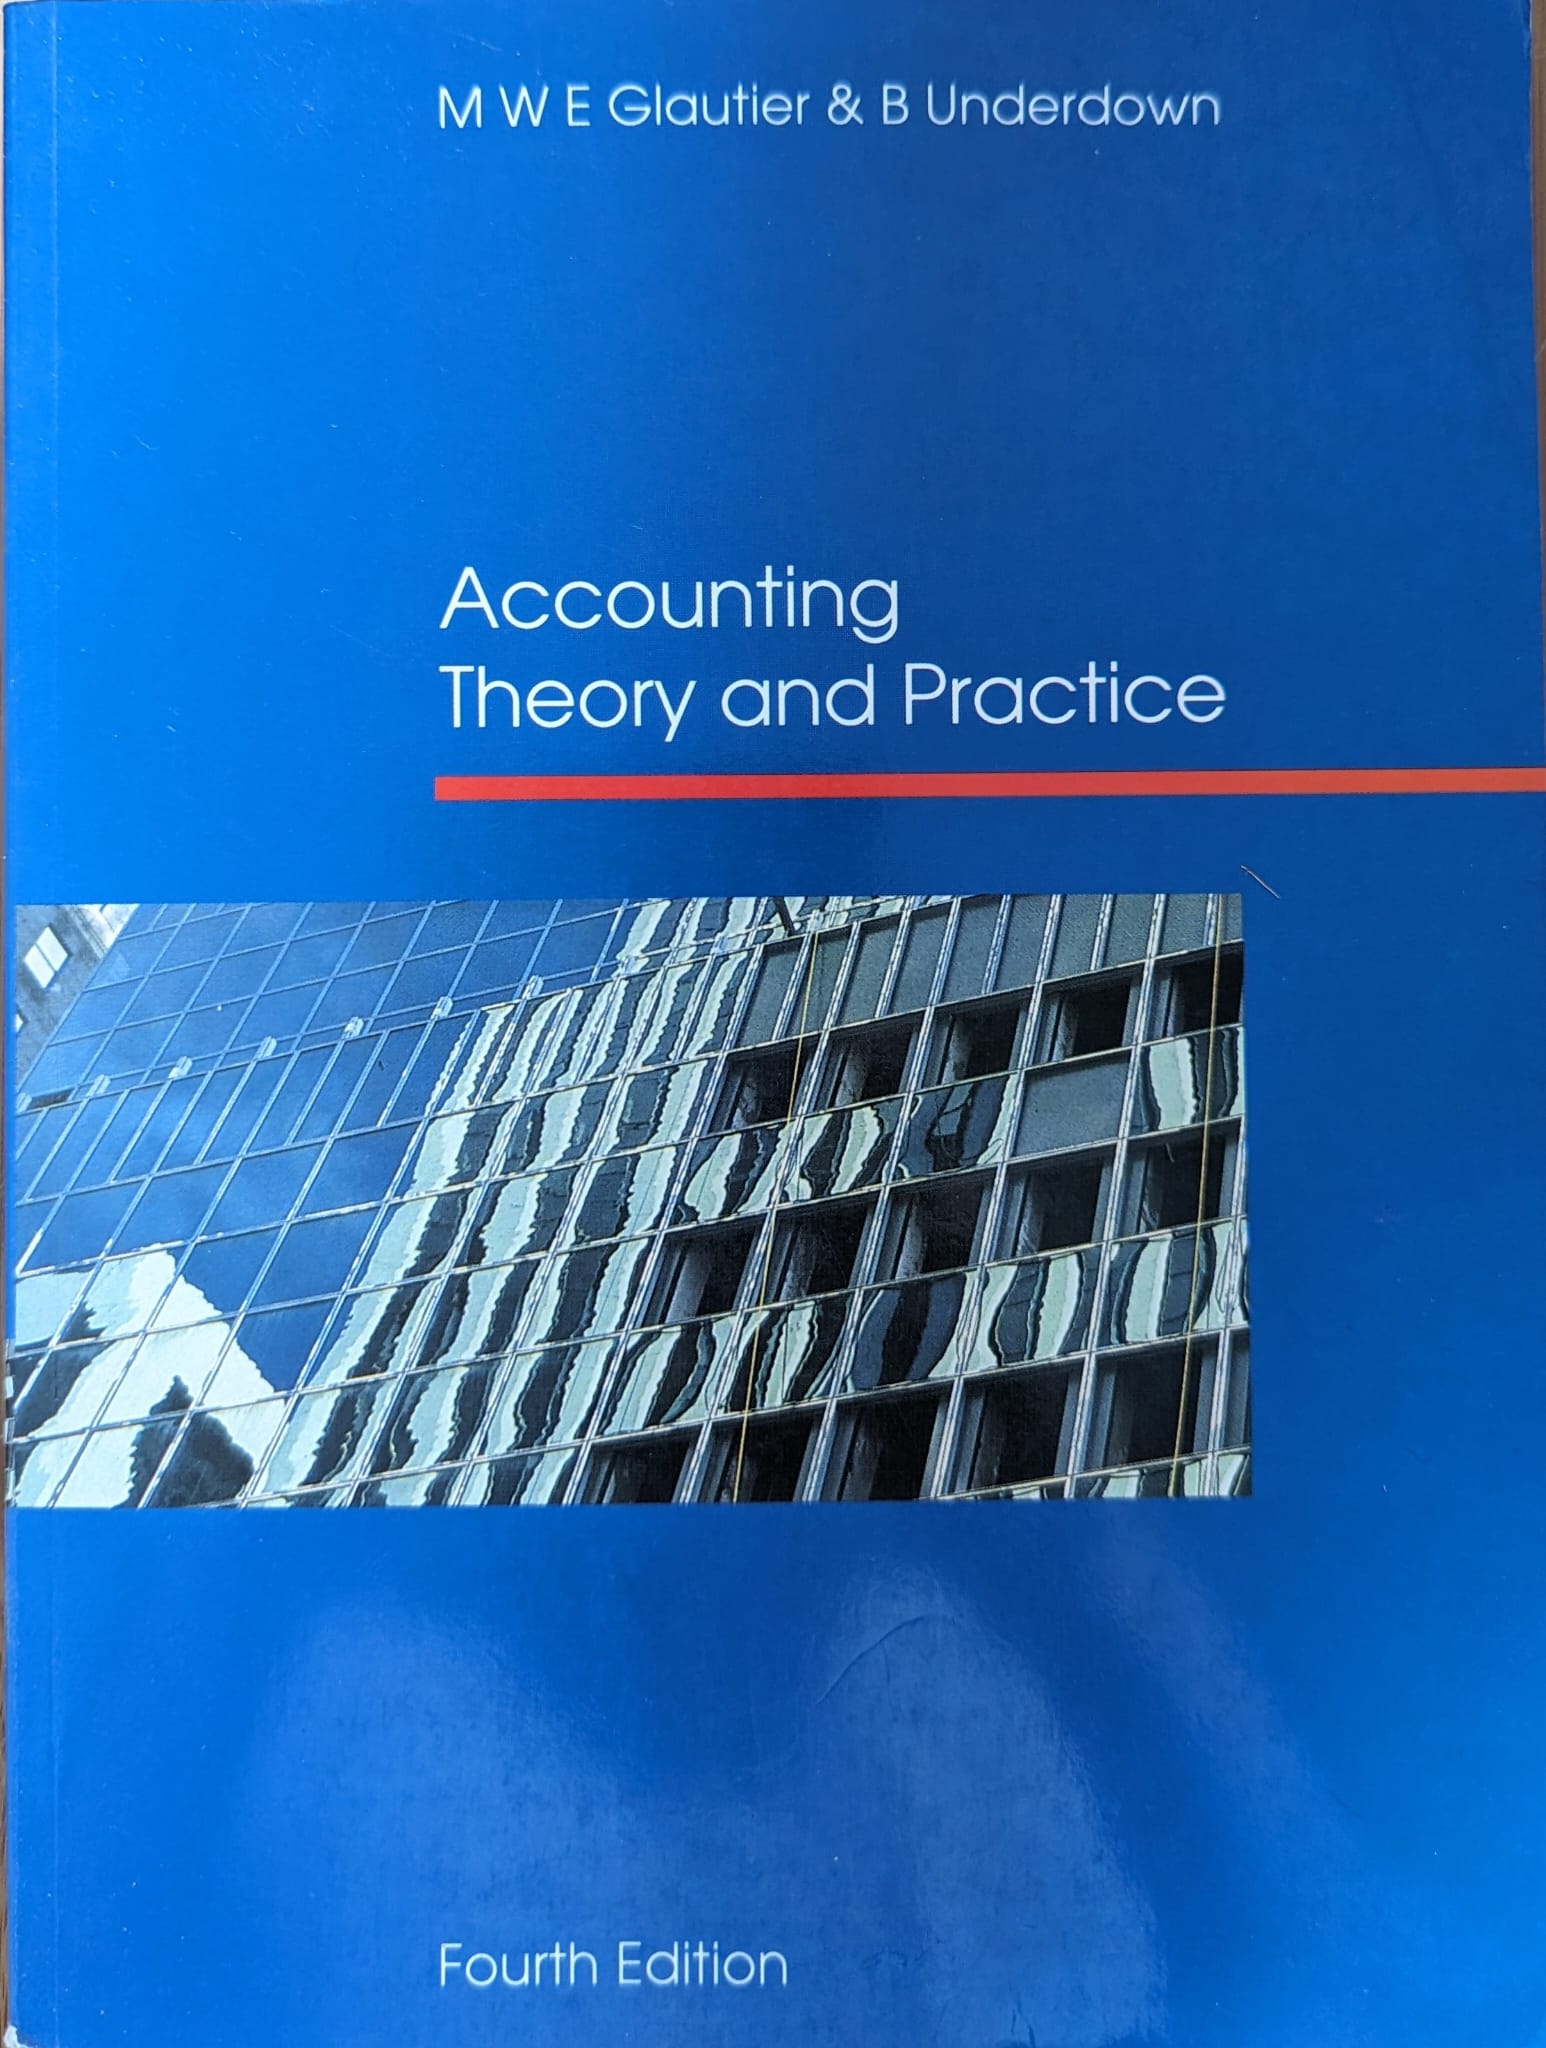 accounting theory and practice                                                                       m w e glautier, b underdown                                                                         